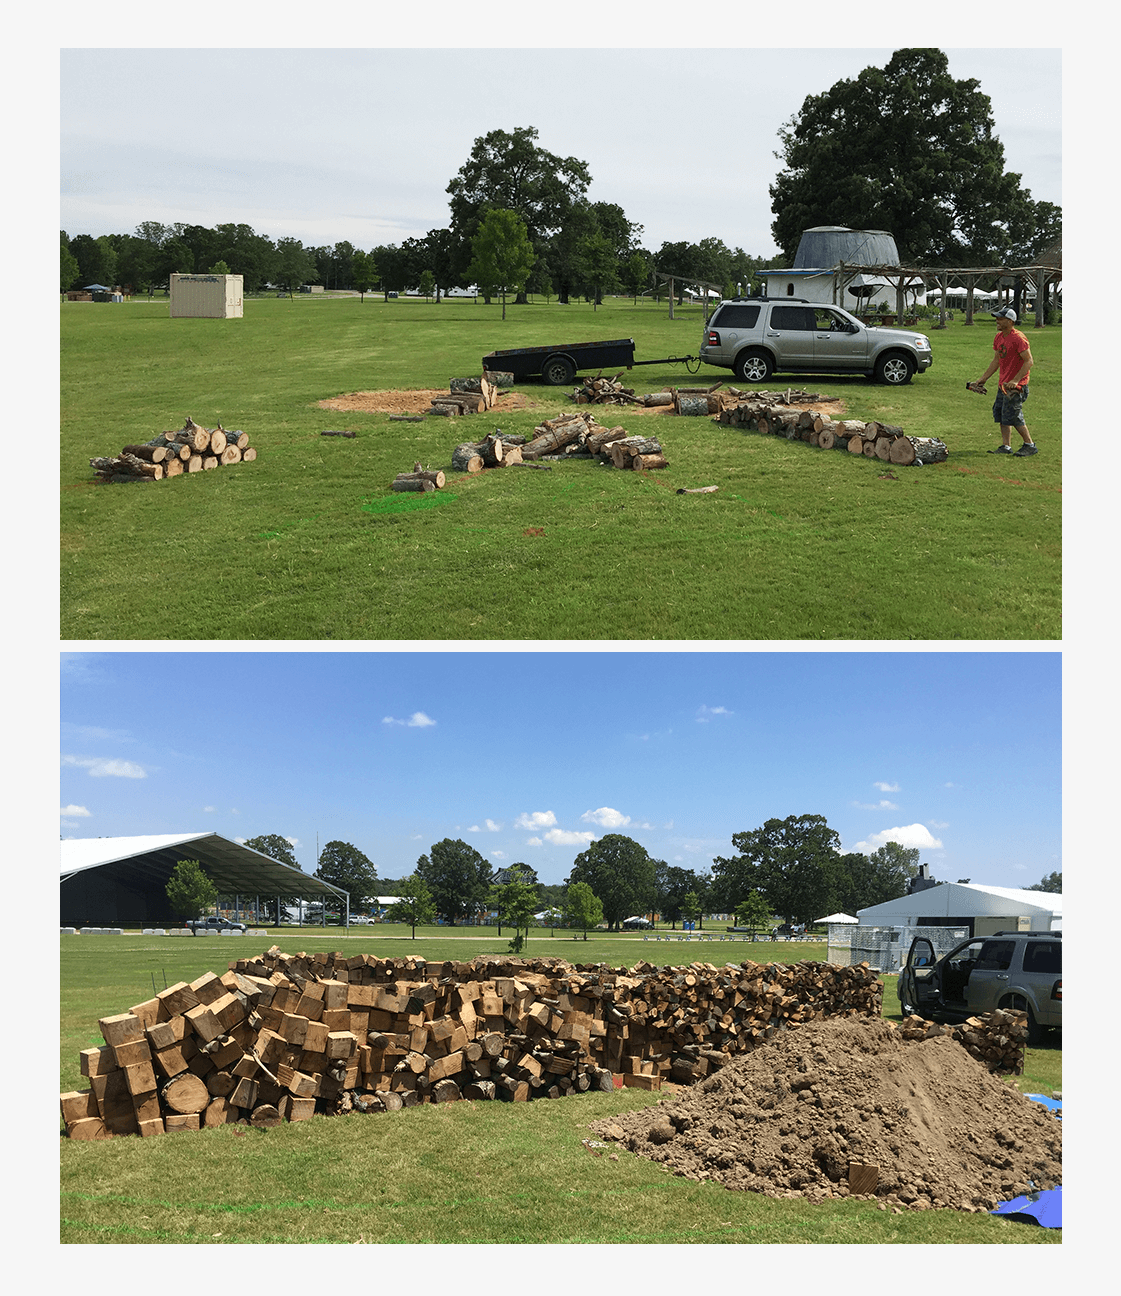 Progress Photo of the Planet Roo Entryway for the Bonnaroo Music & Arts Festival in Manchester, Tennessee